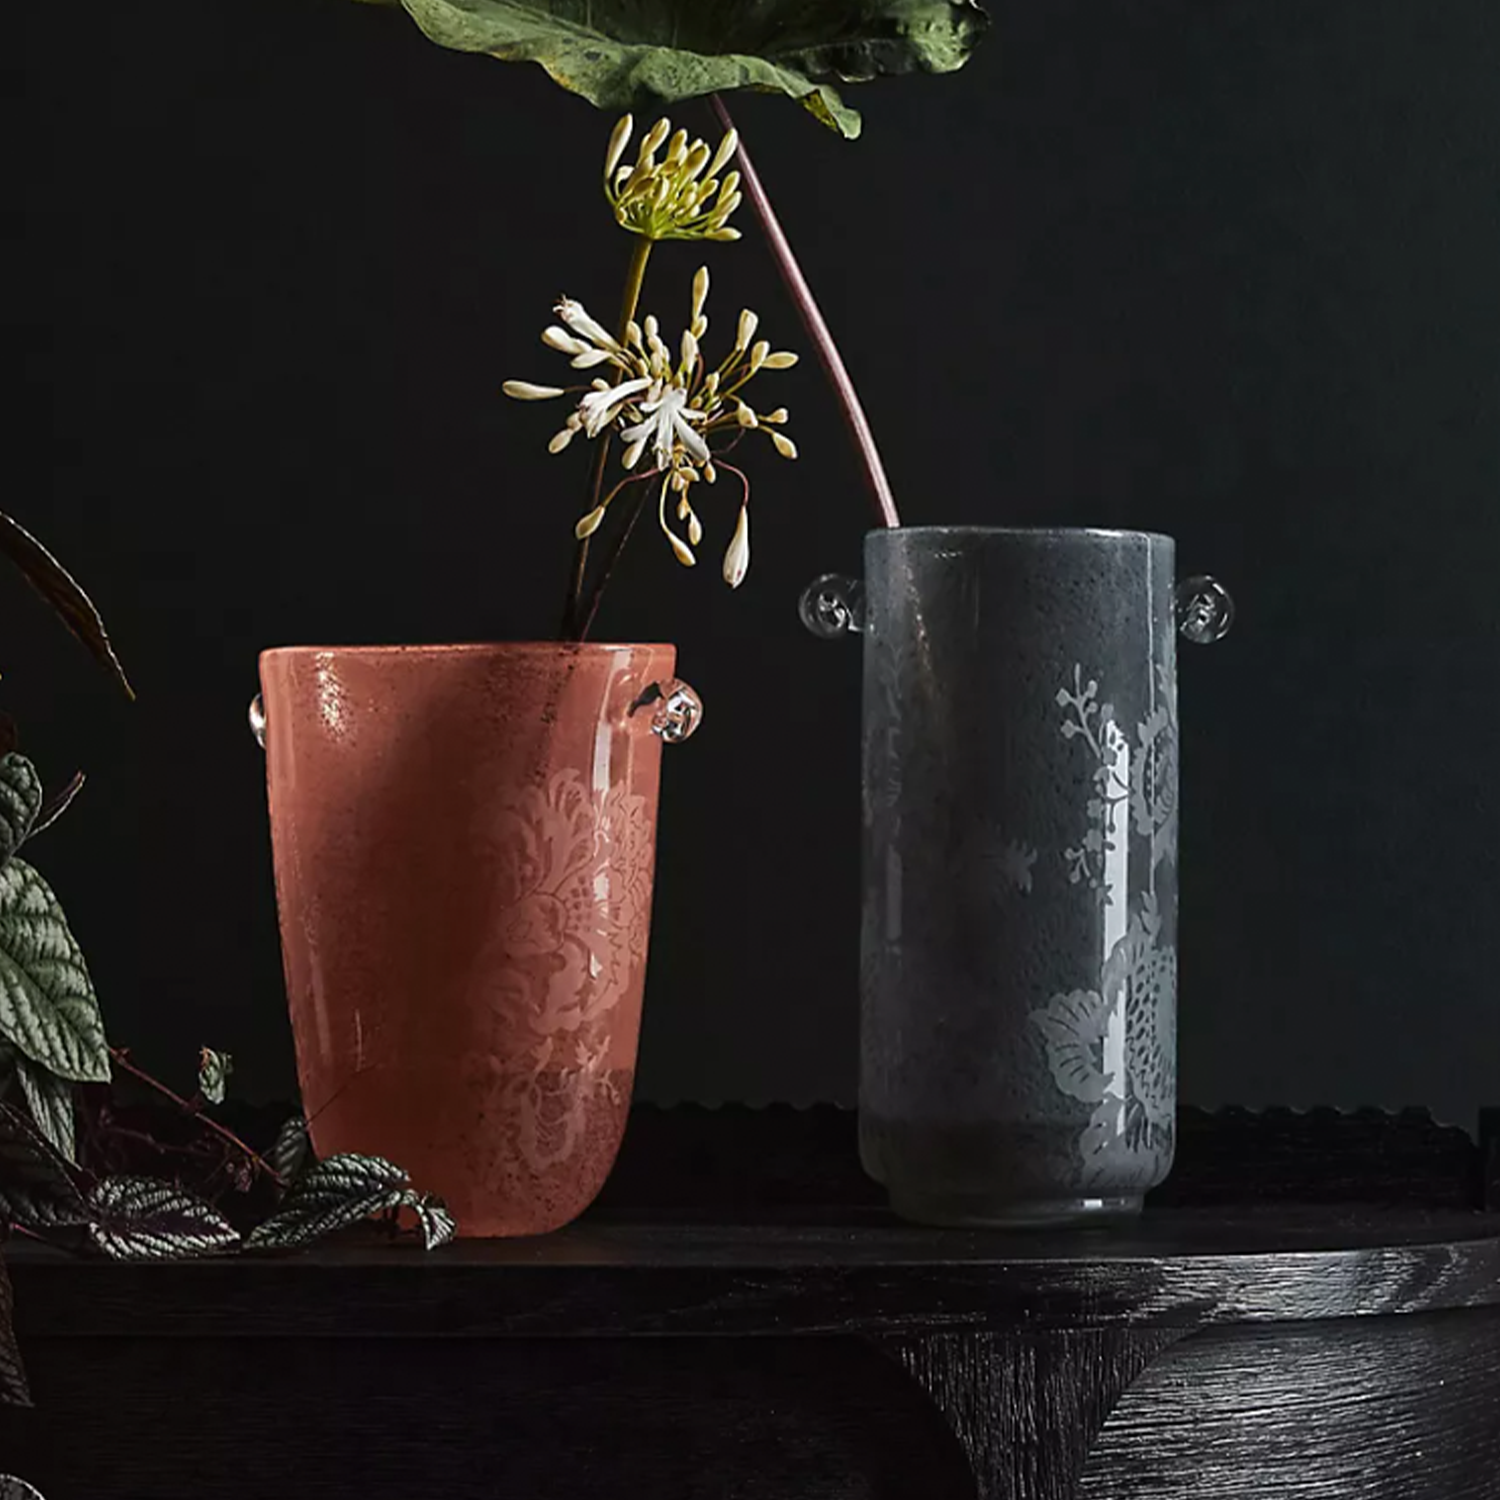 House of Hackney rose and gray glass vases